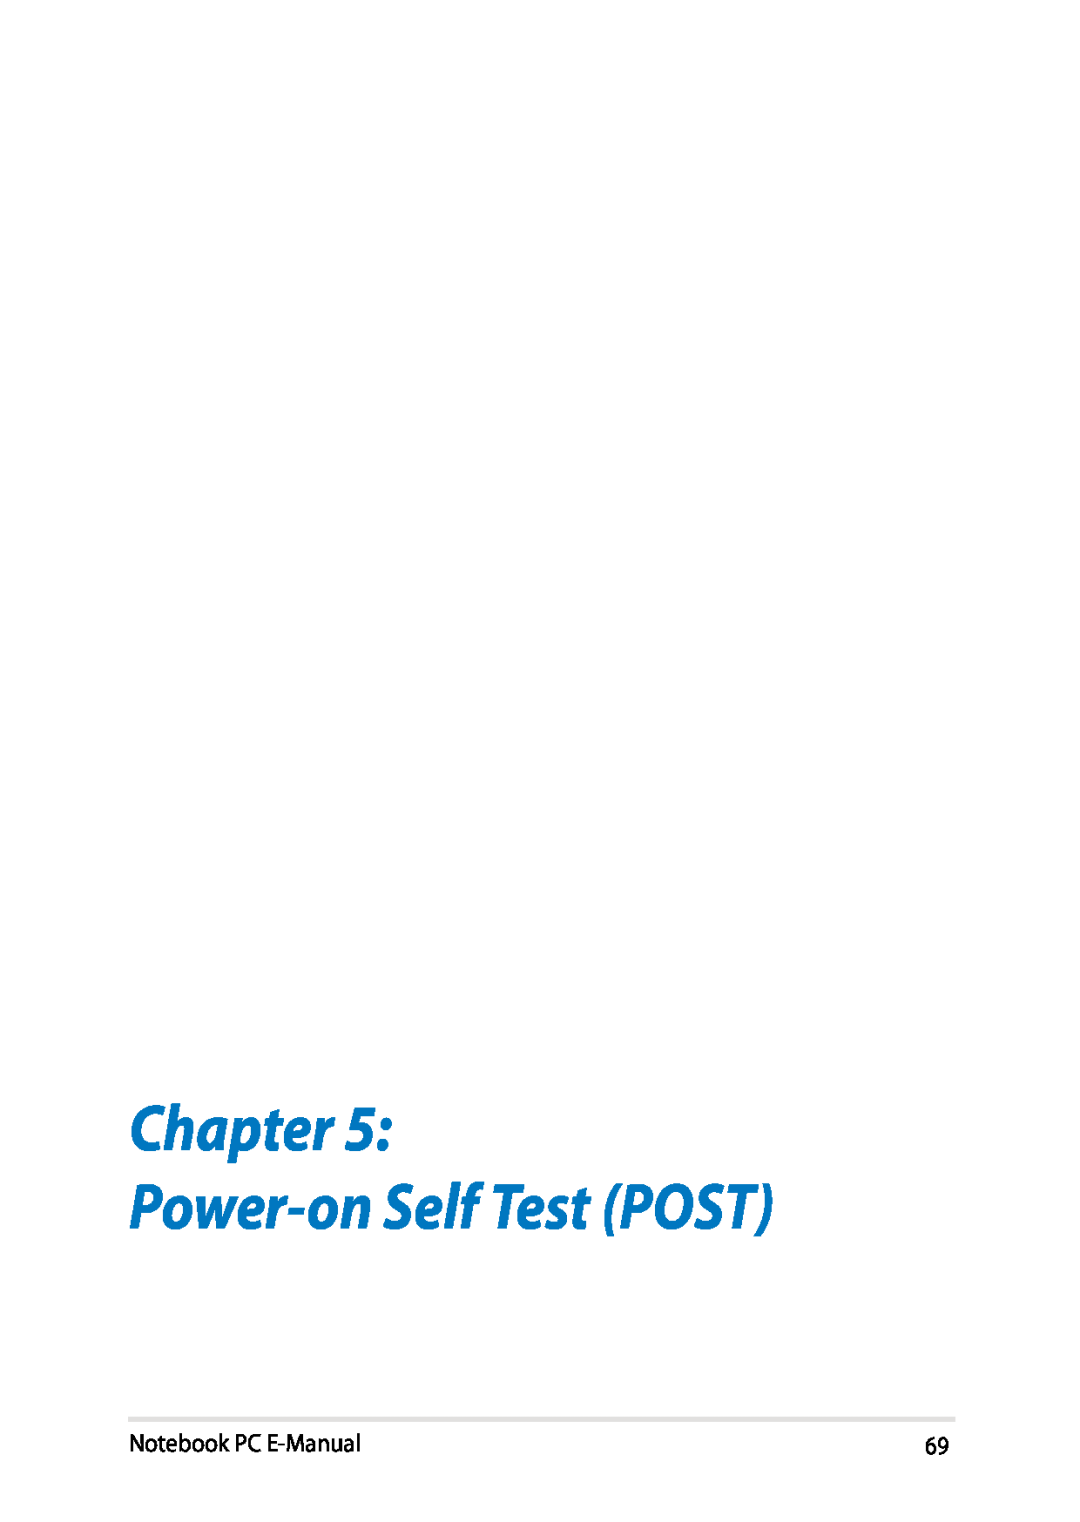 Asus E8438 manual Chapter Power-on Self Test POST, Notebook PC E-Manual 